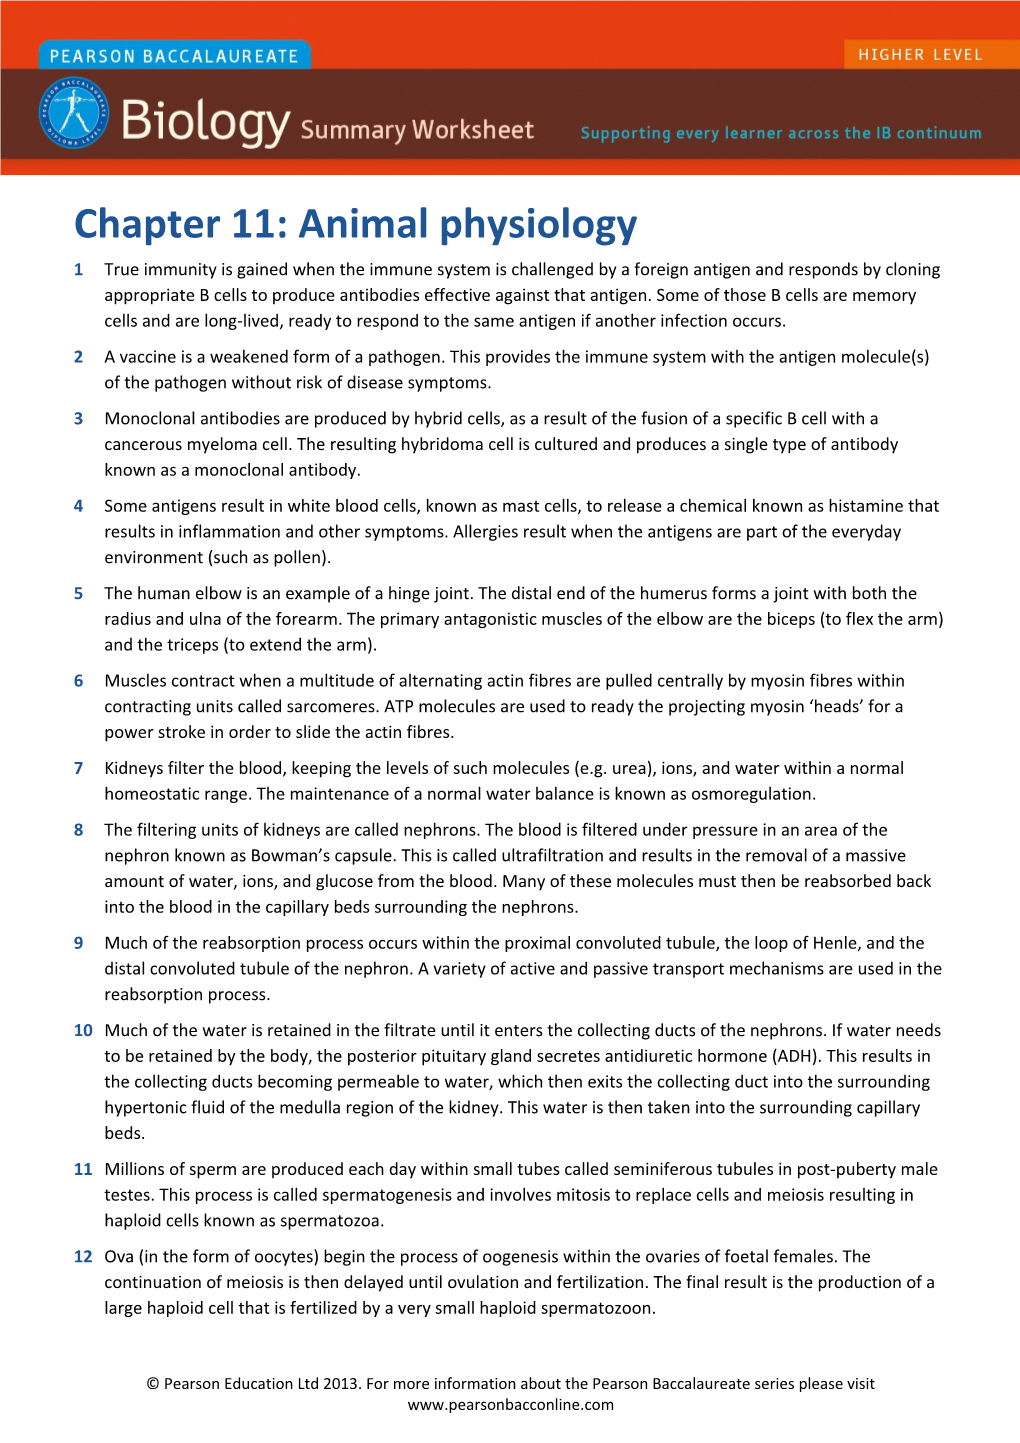 Chapter 11: Animal Physiology